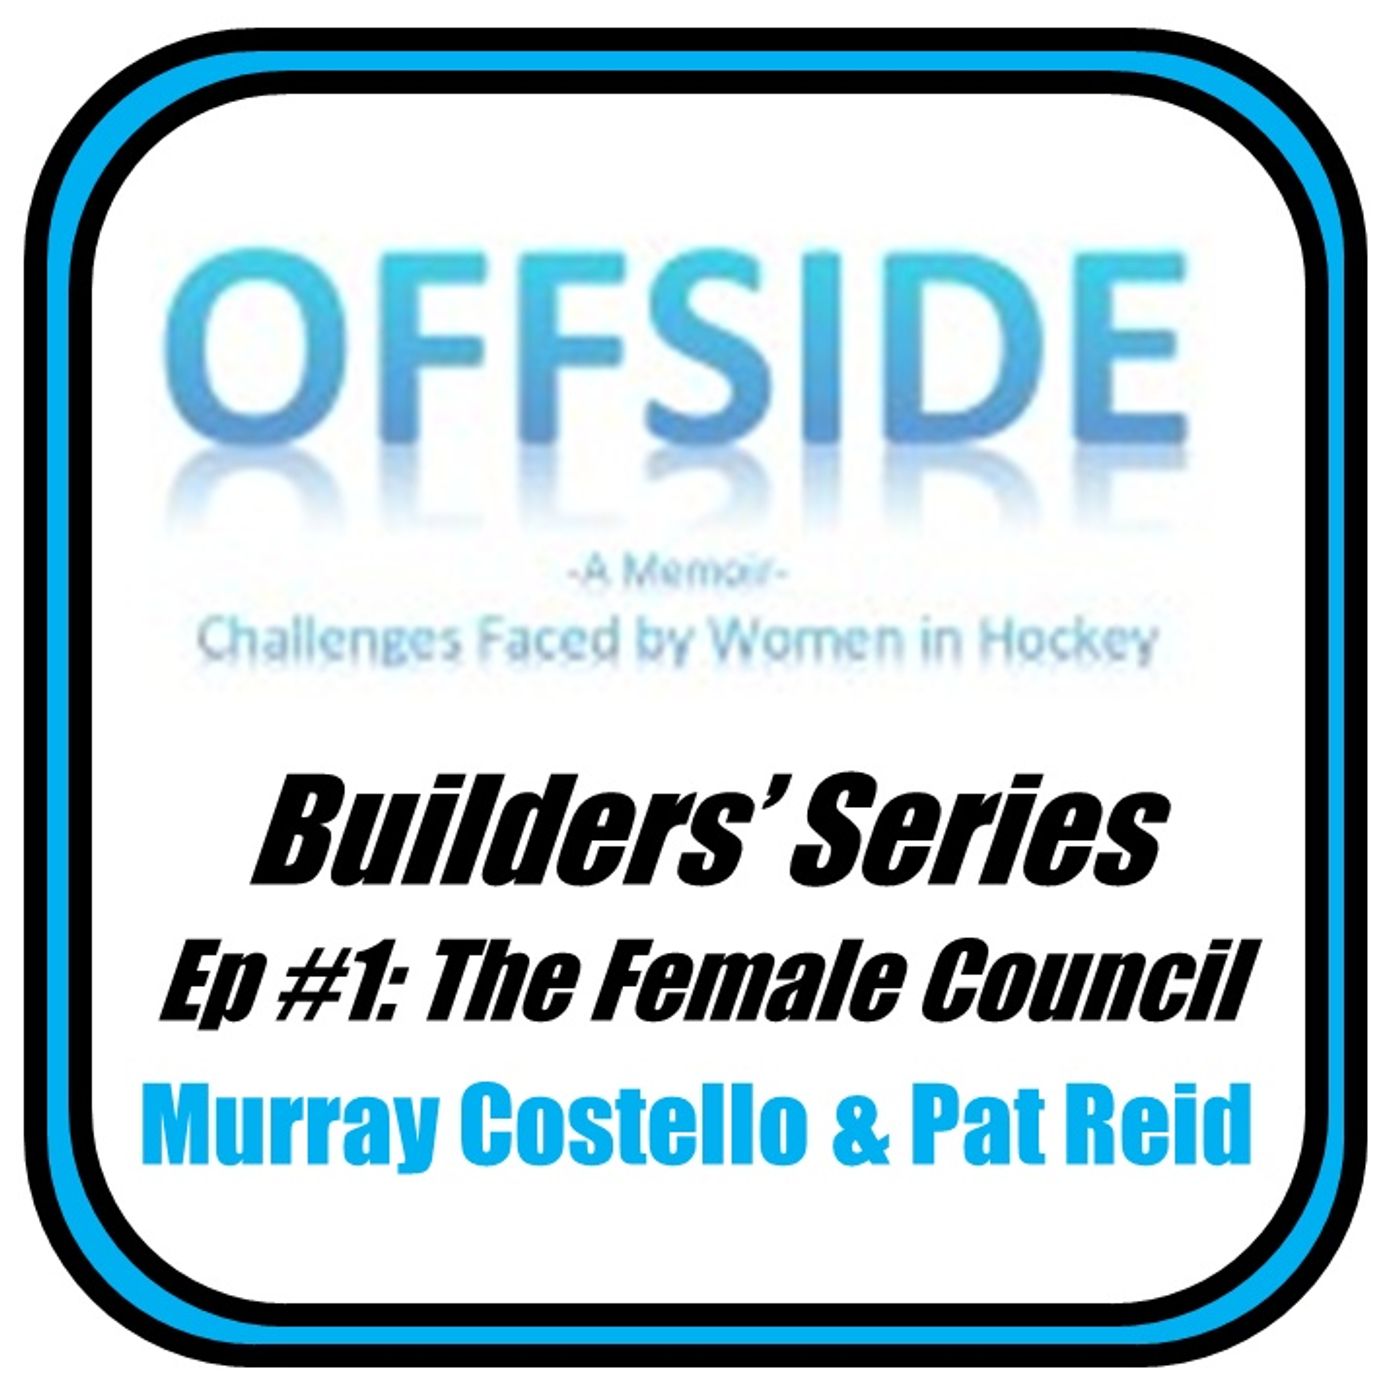 OFFSIDE: Builders' Series #1_The Female Council